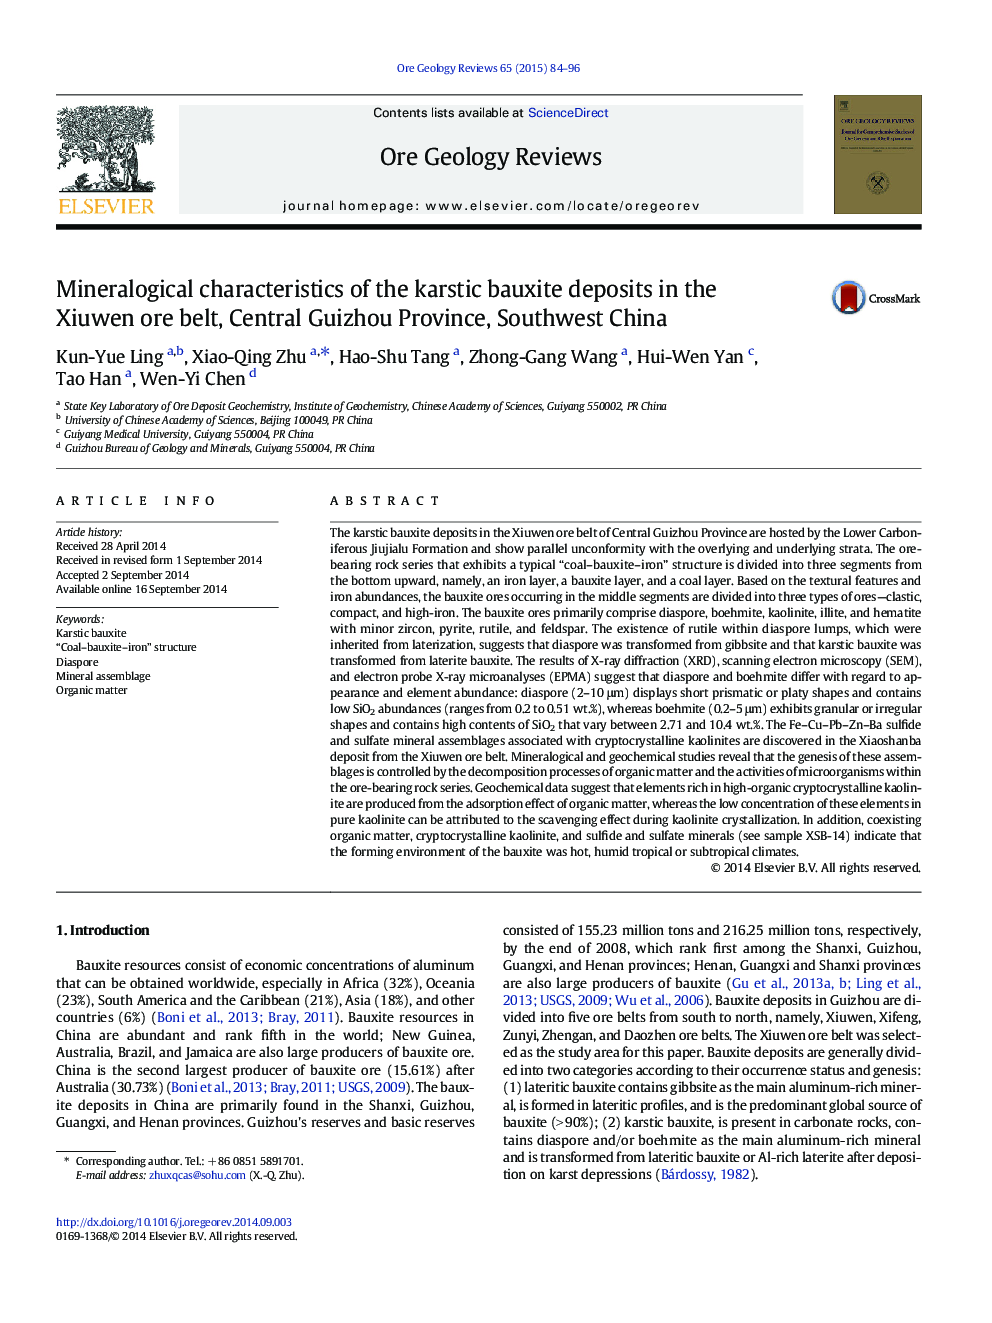 Mineralogical characteristics of the karstic bauxite deposits in the Xiuwen ore belt, Central Guizhou Province, Southwest China